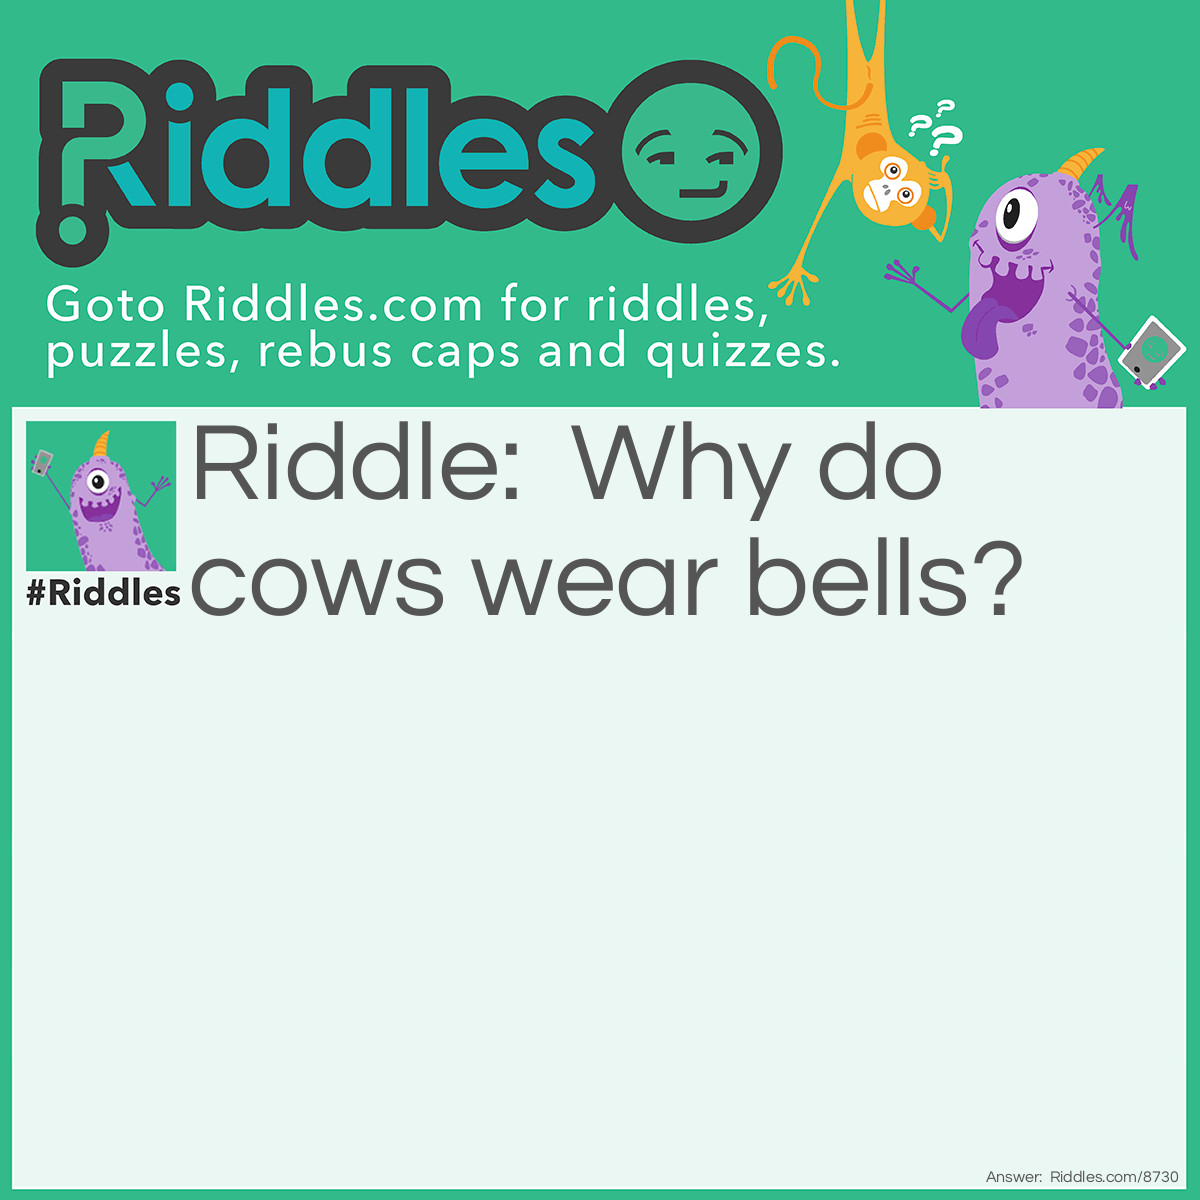 Riddle: Why do cows wear bells? Answer: Because their horns don't work.